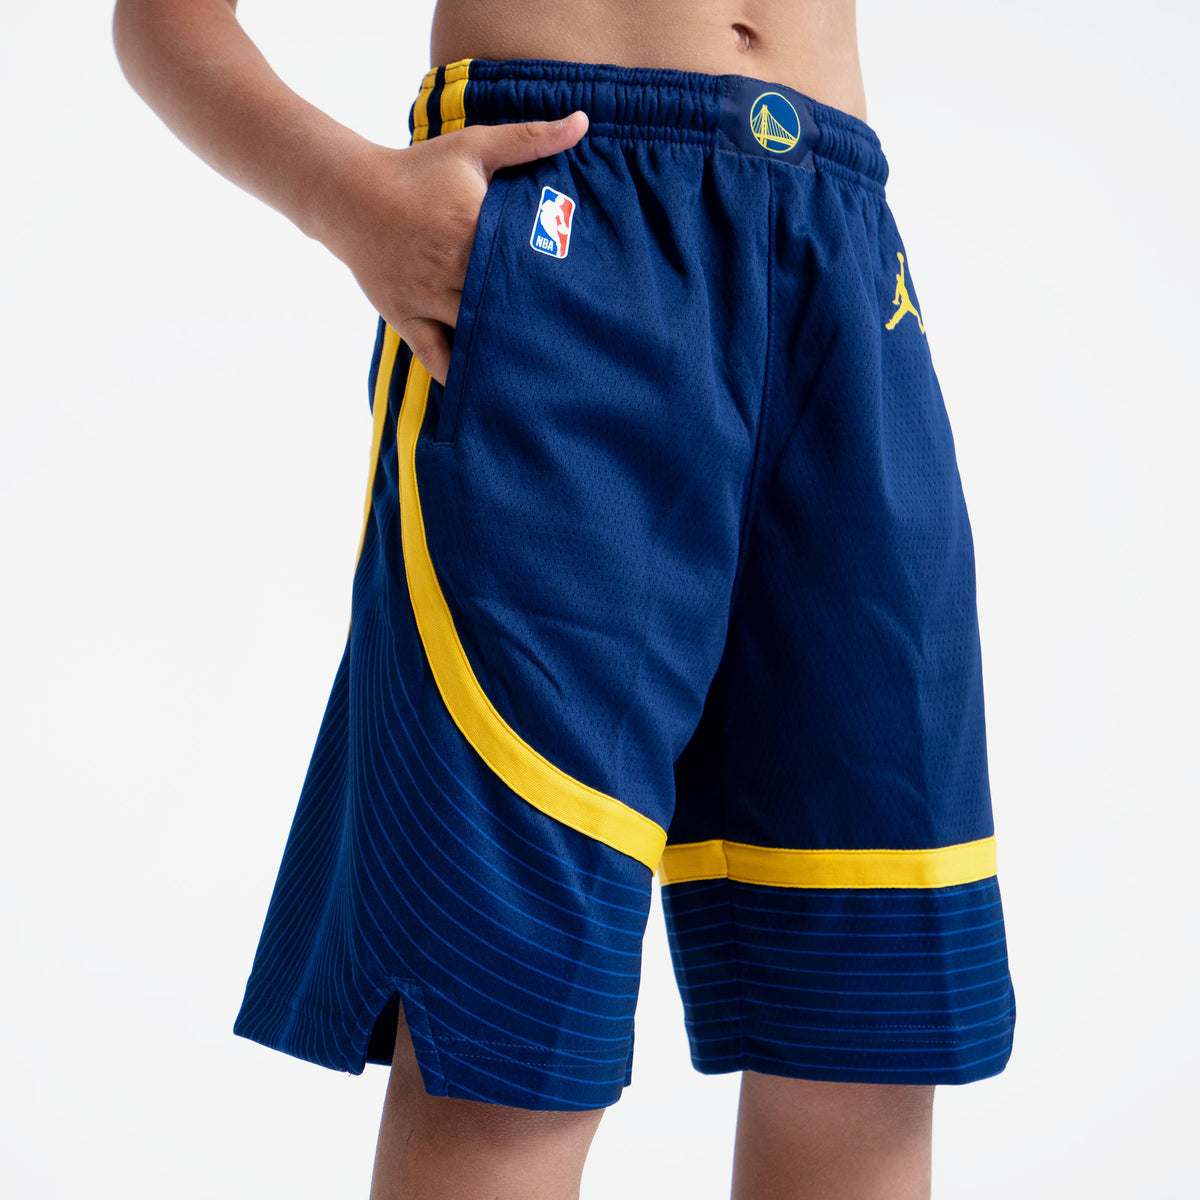  Golden State Warriors Youth Shorts